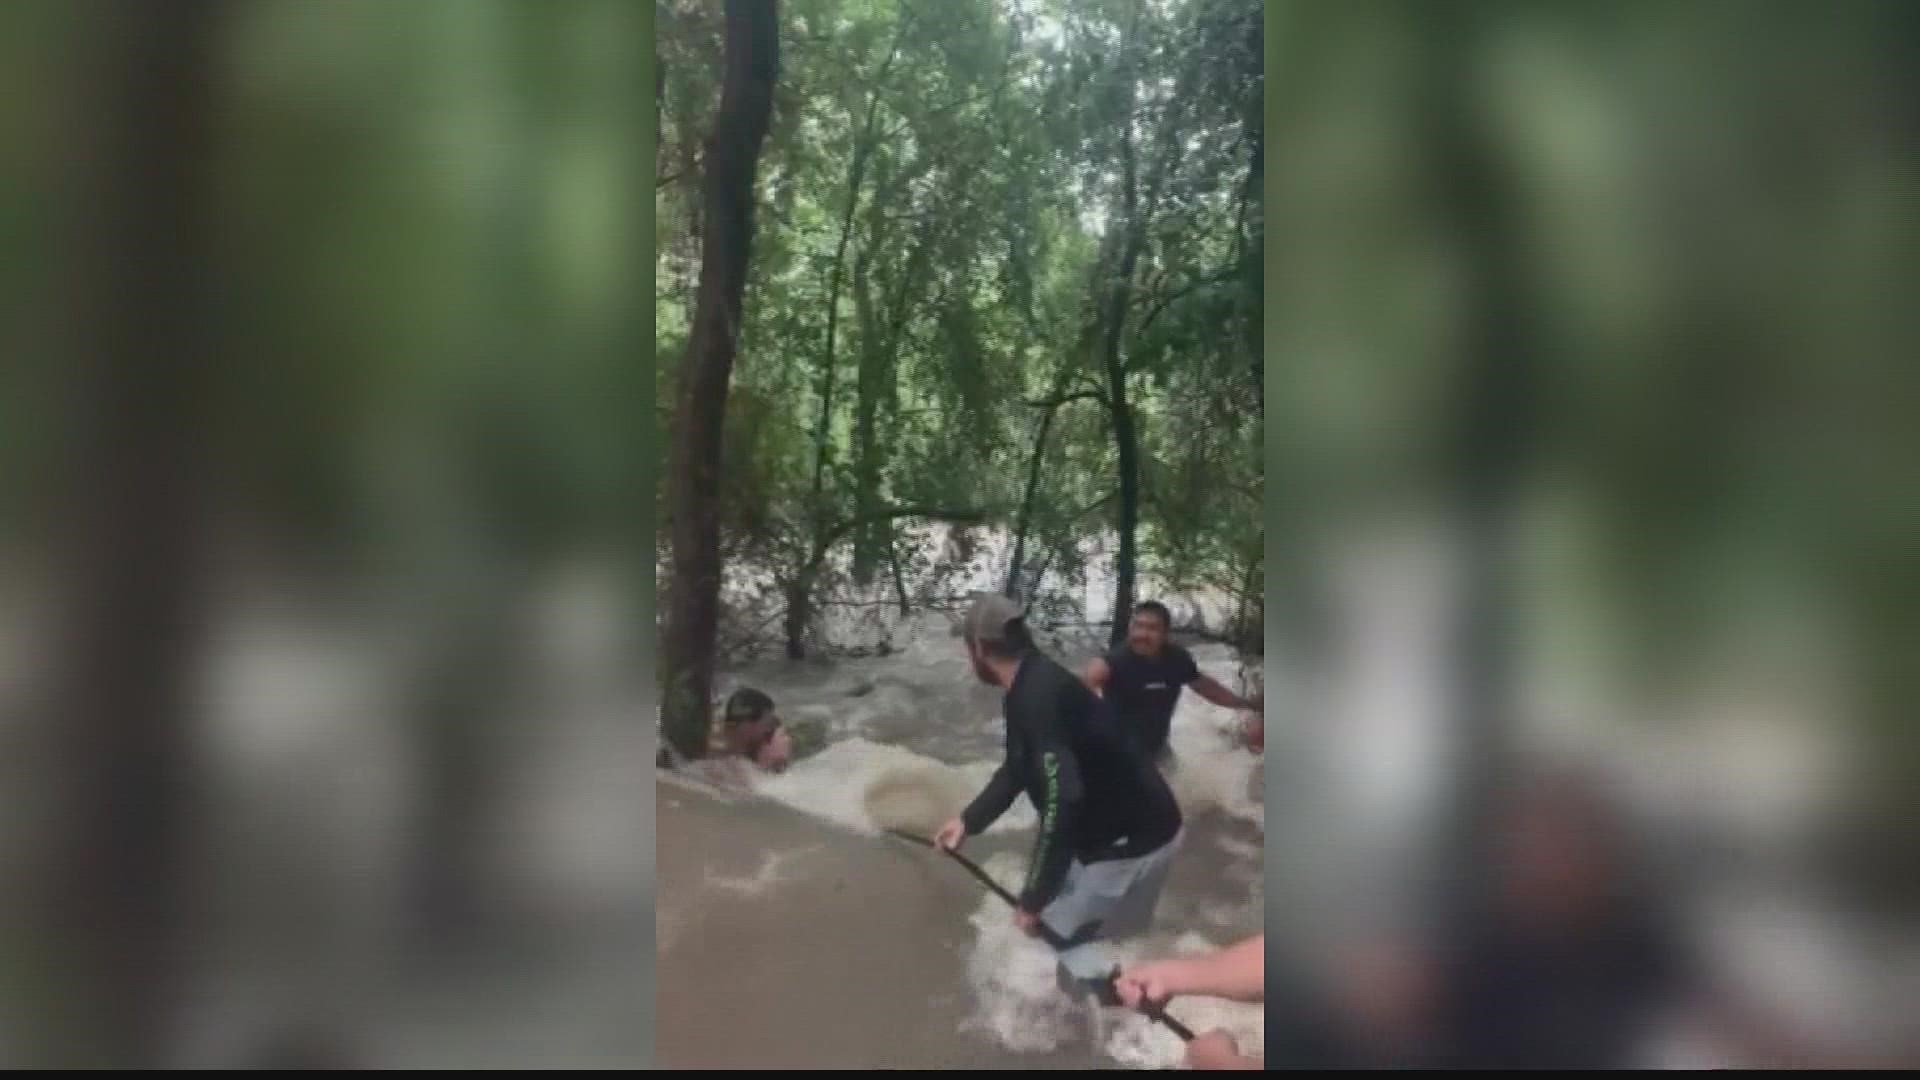 Two children and their father were saved from the rising flood waters.